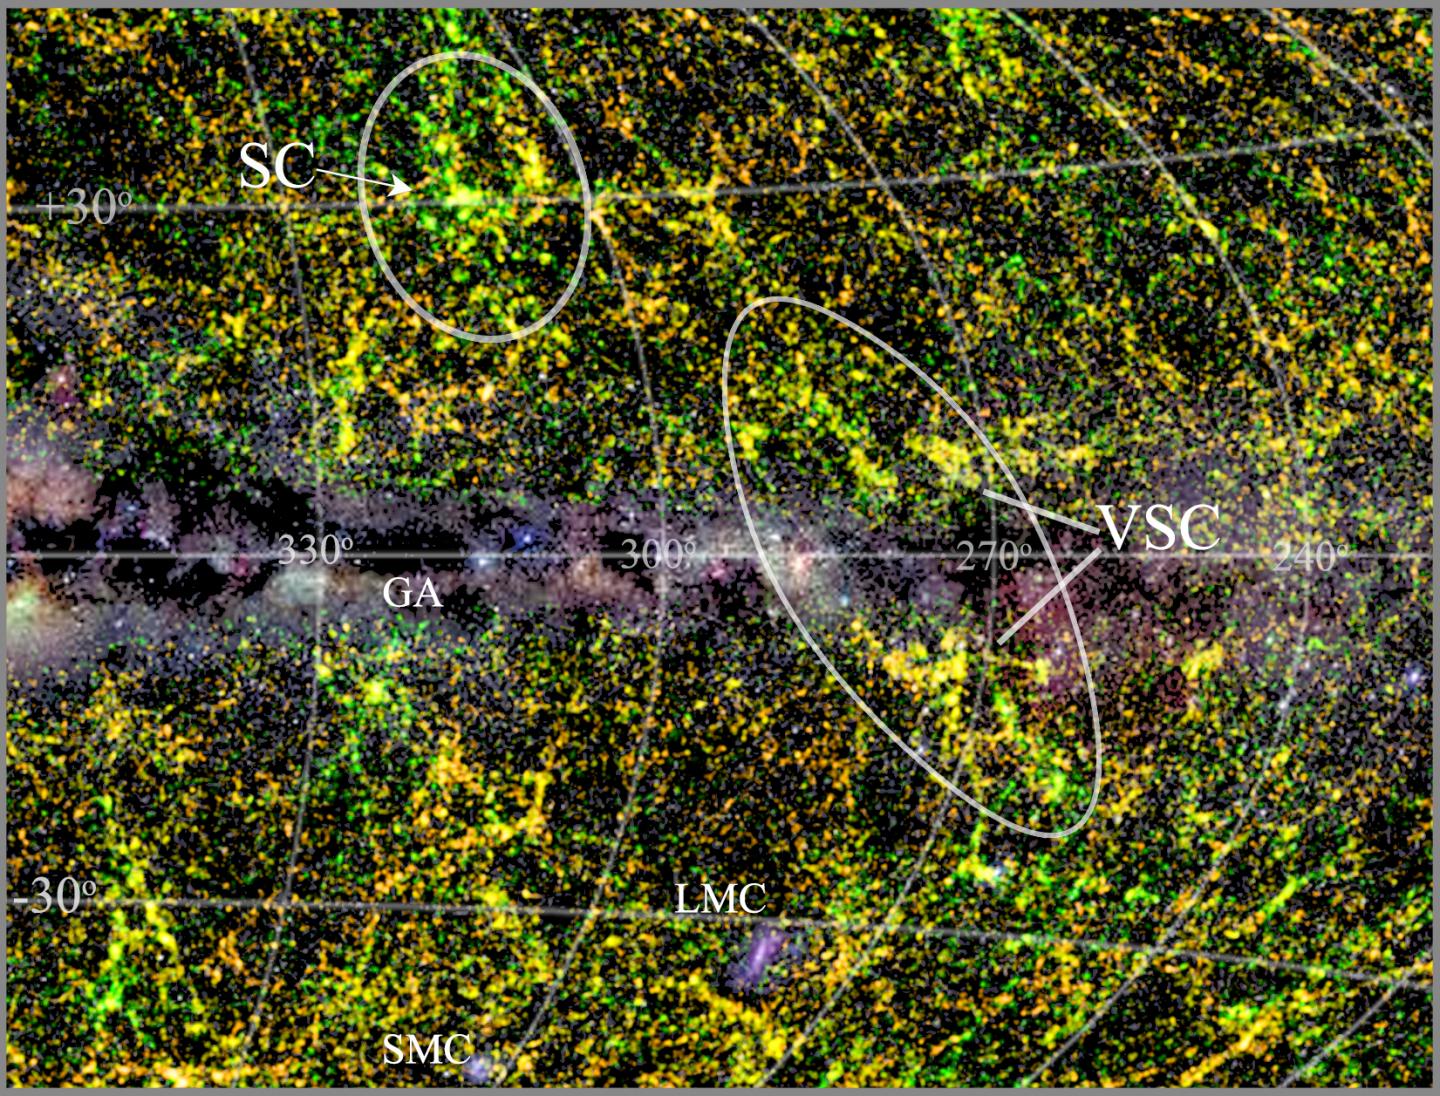 Vela Supercluster and Shapely Supercluster